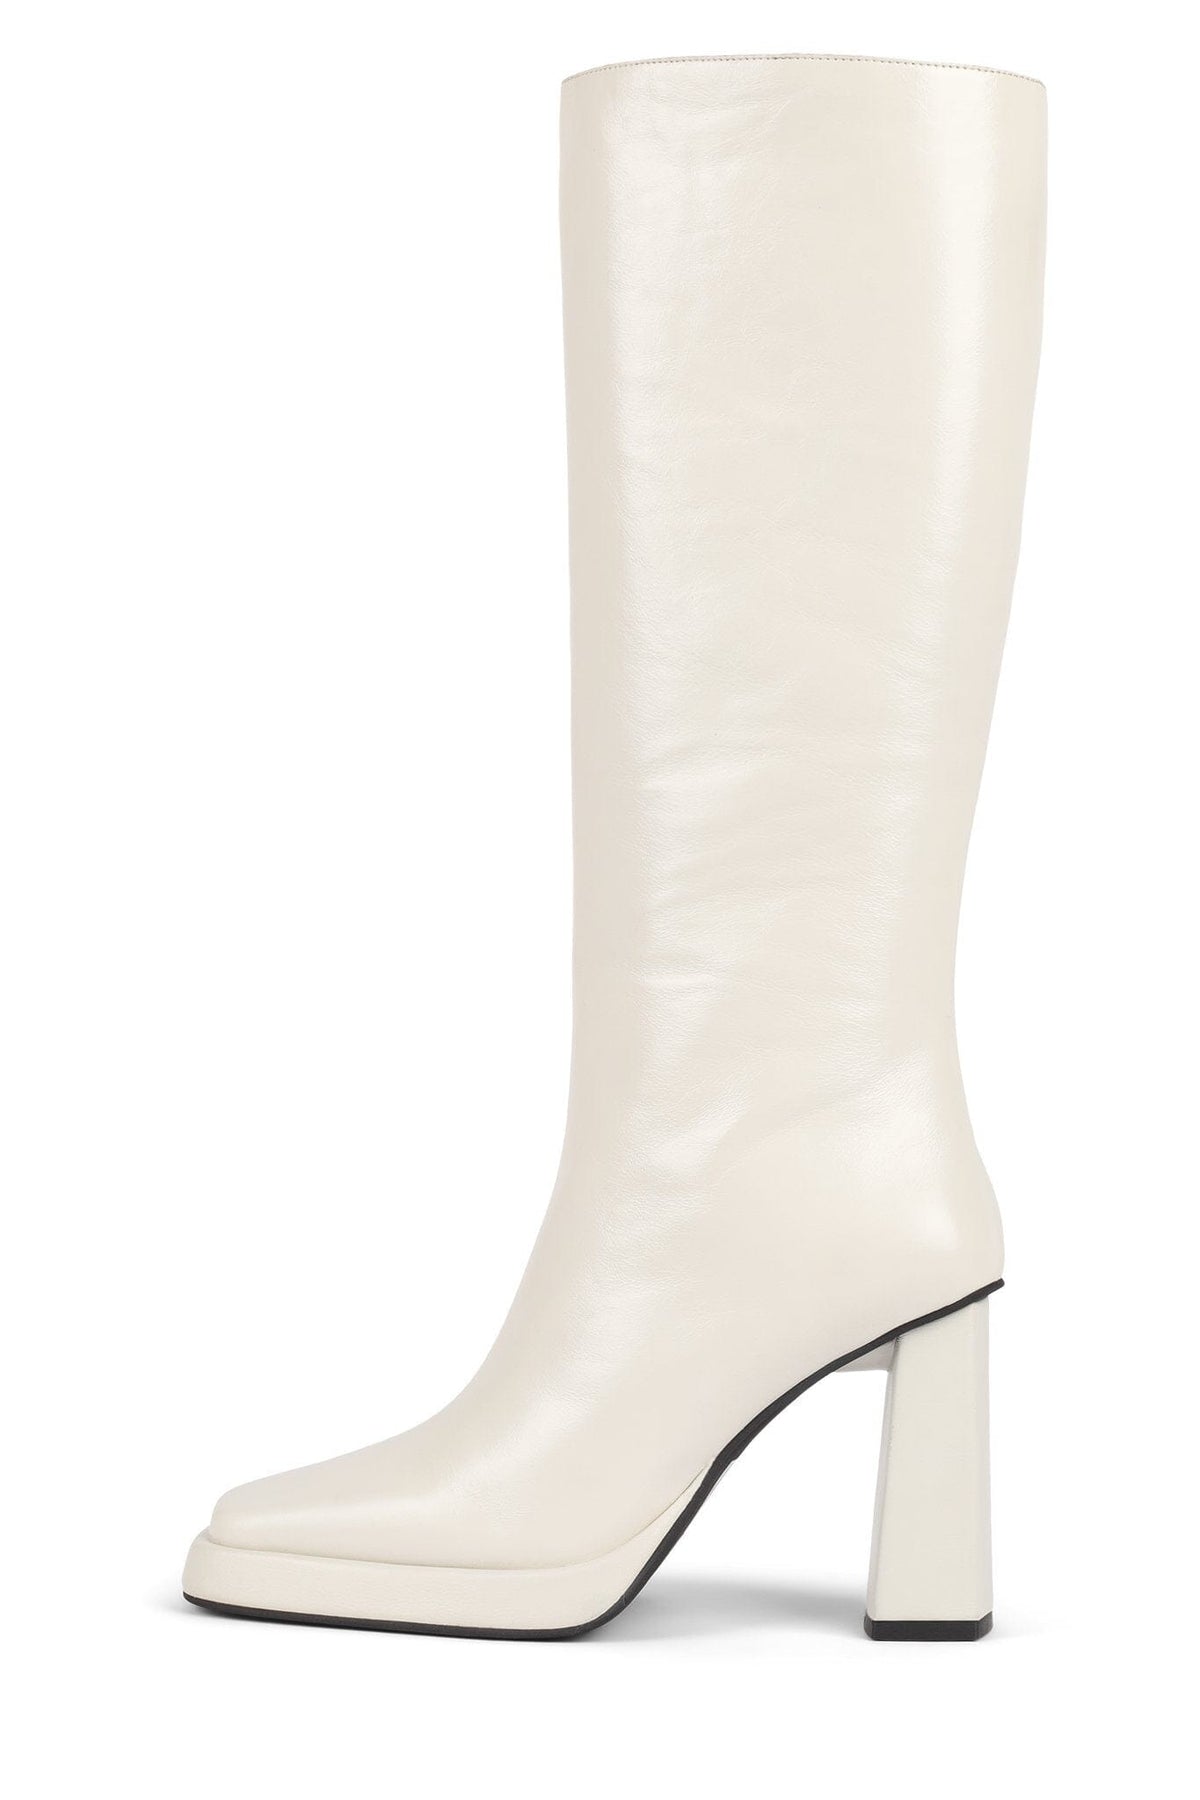 MAXIMAL Jeffrey Campbell Knee-High Boot White